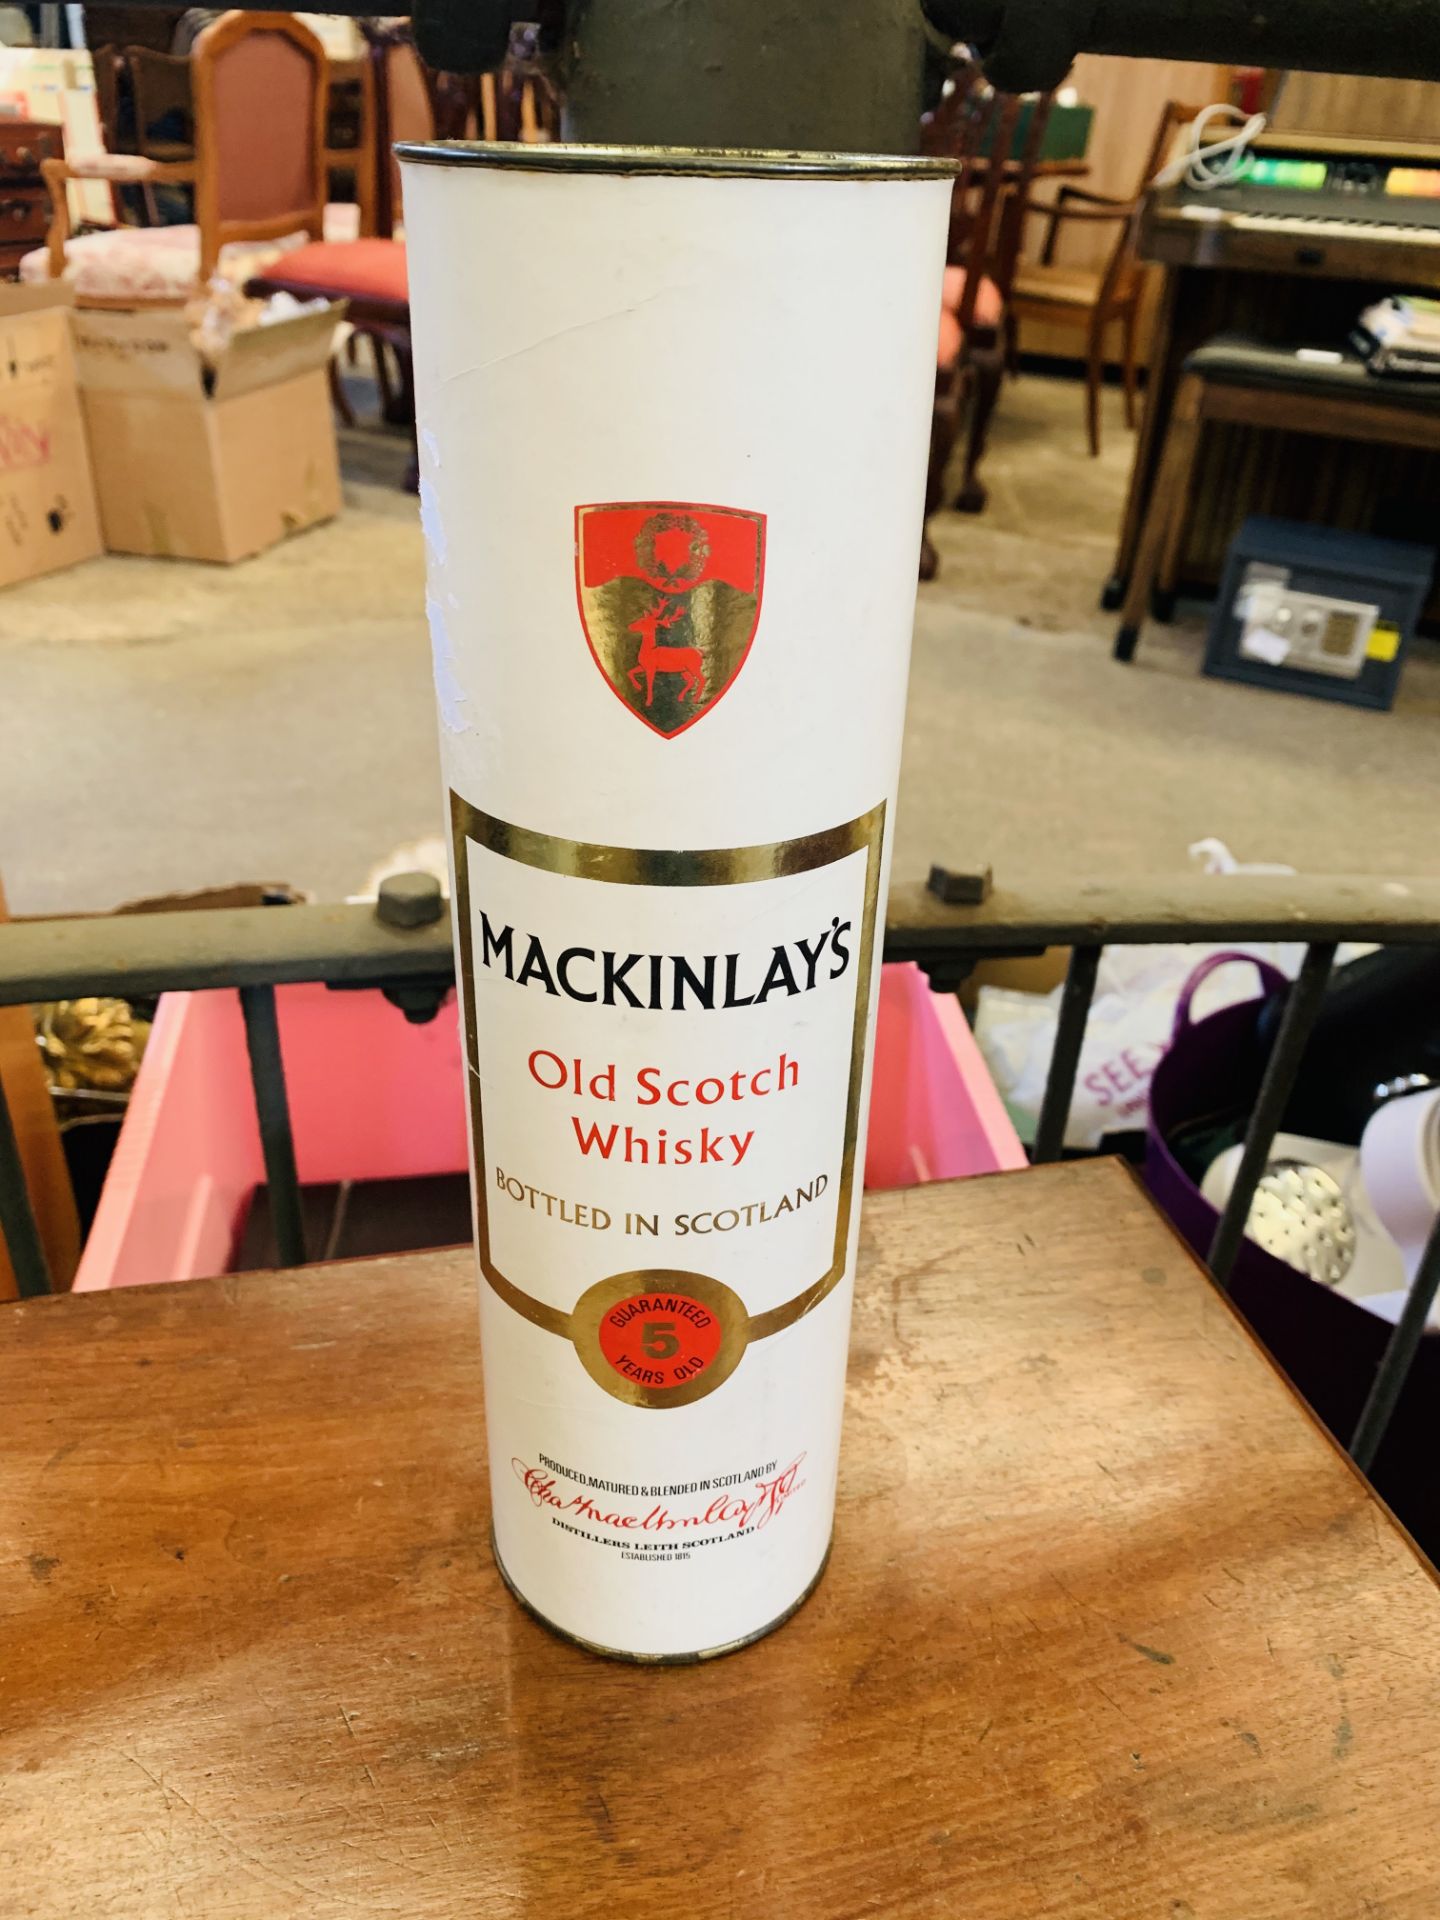 Bottle of Mackinlays whisky over 35 years old. - Image 2 of 2